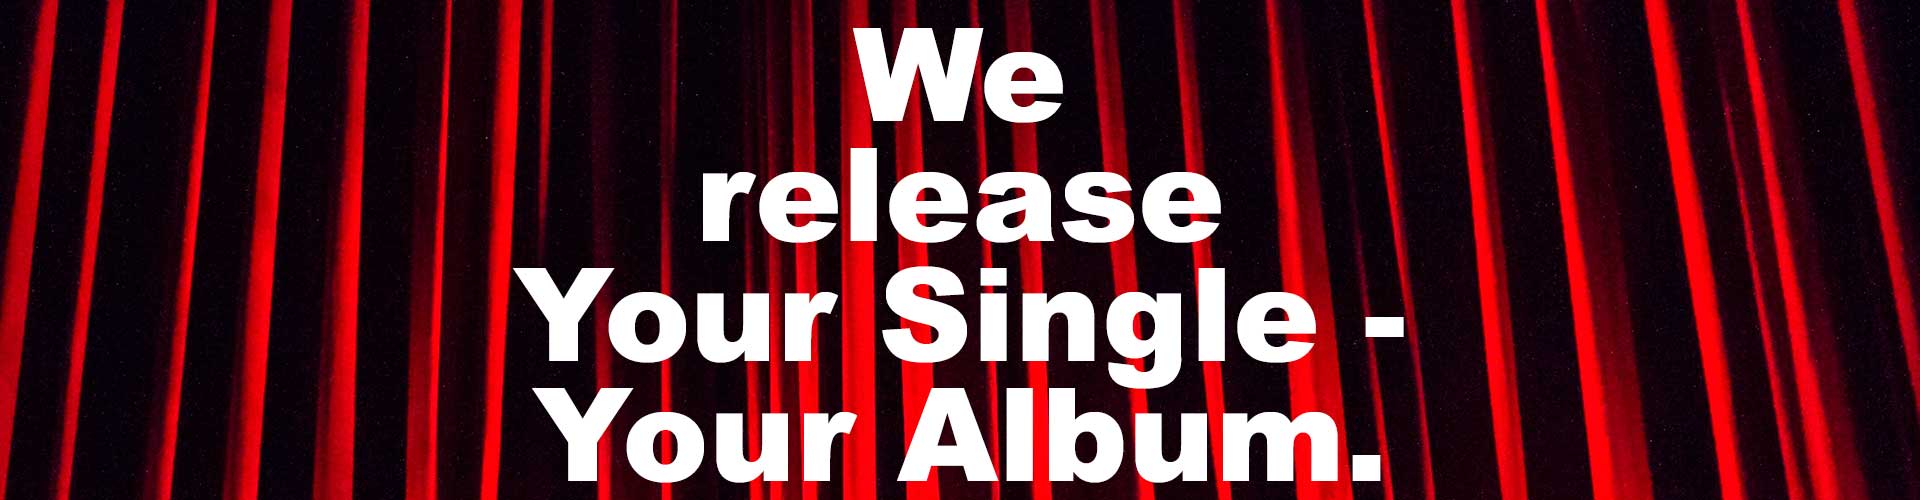 We release Your Single - Your Album.